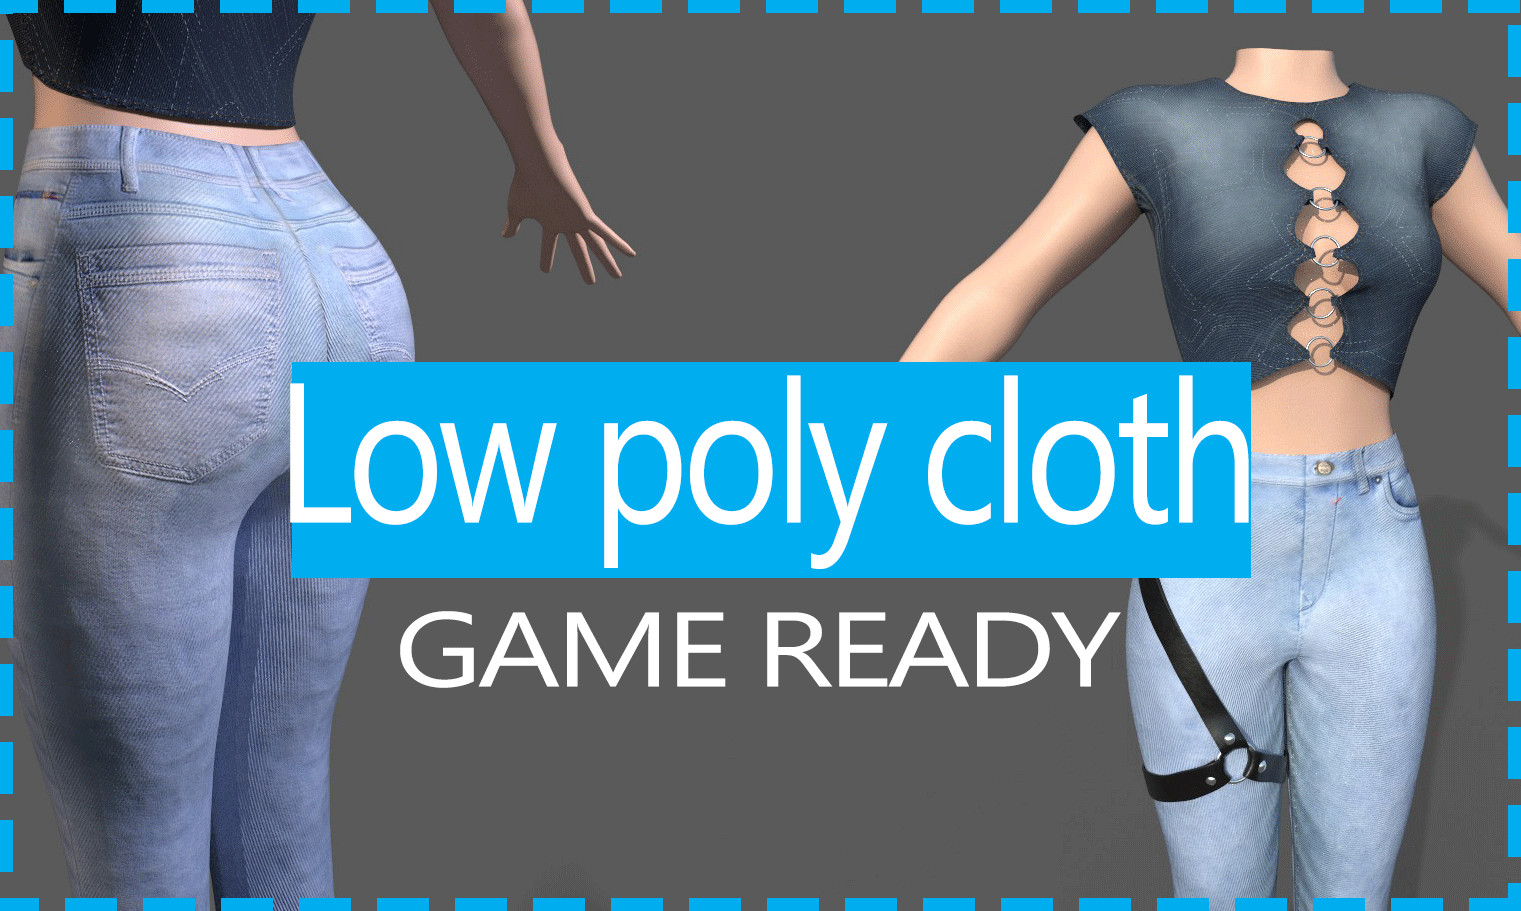 ArtStation - Second life game ready cloth game asset | Game Assets